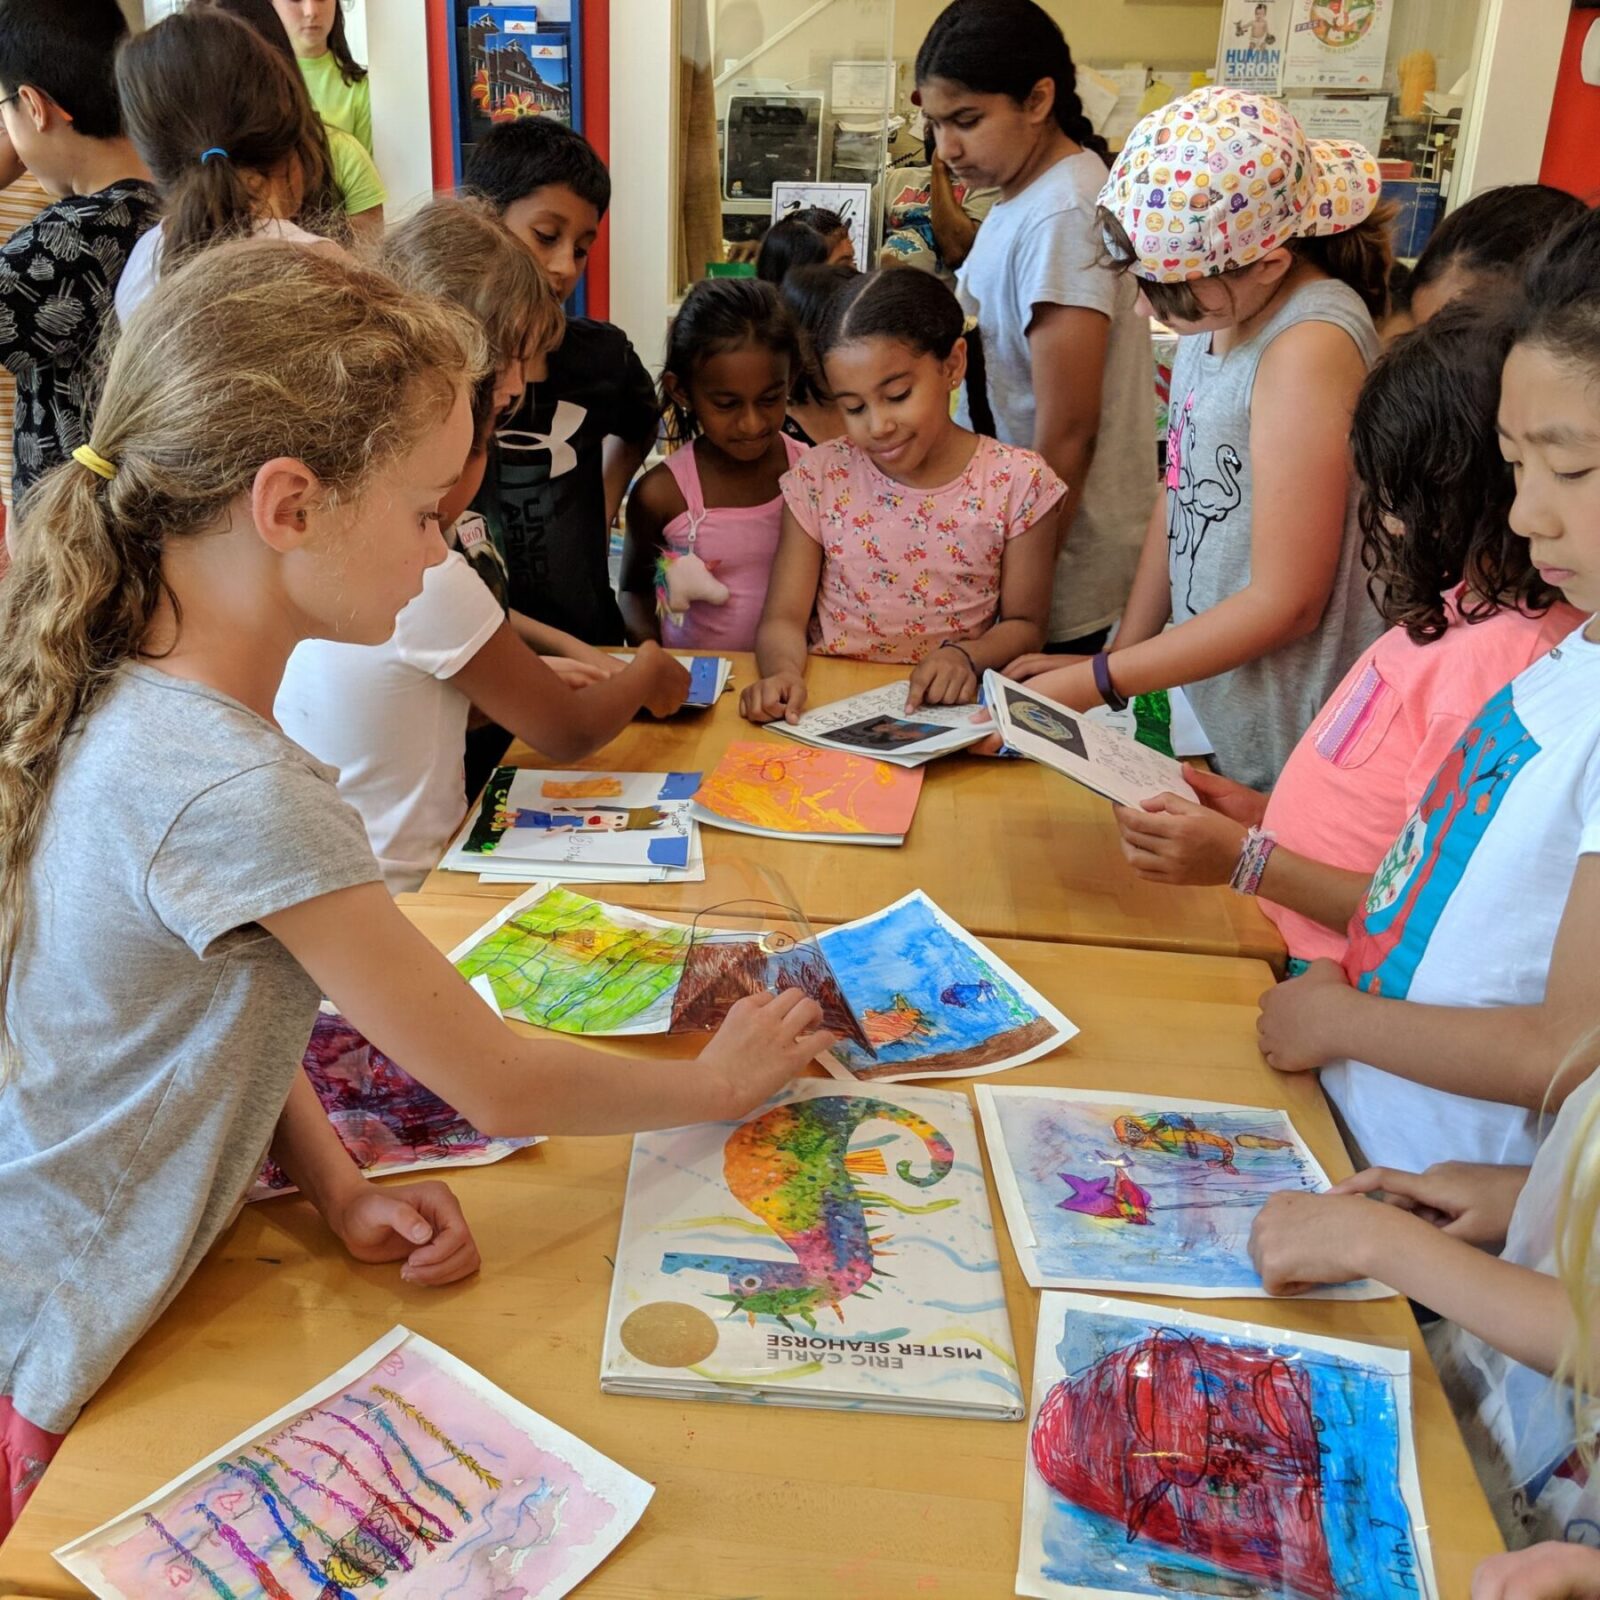 Group of children looking at artwork on a table